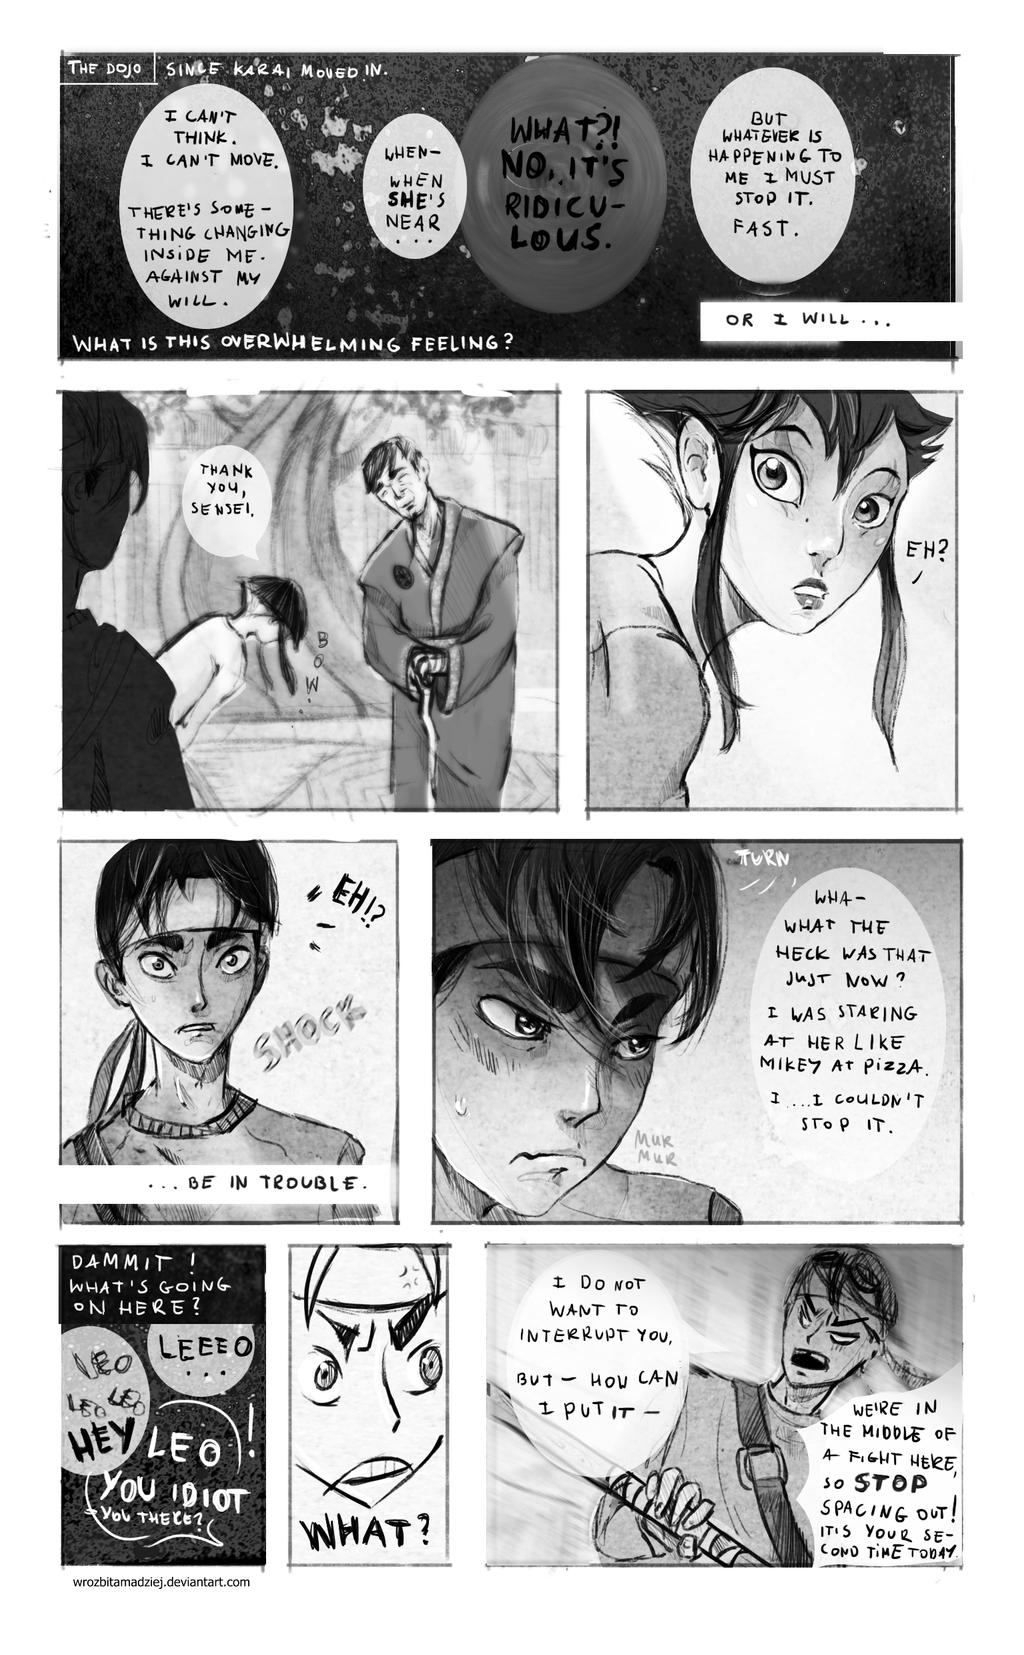 Just stop | page 1